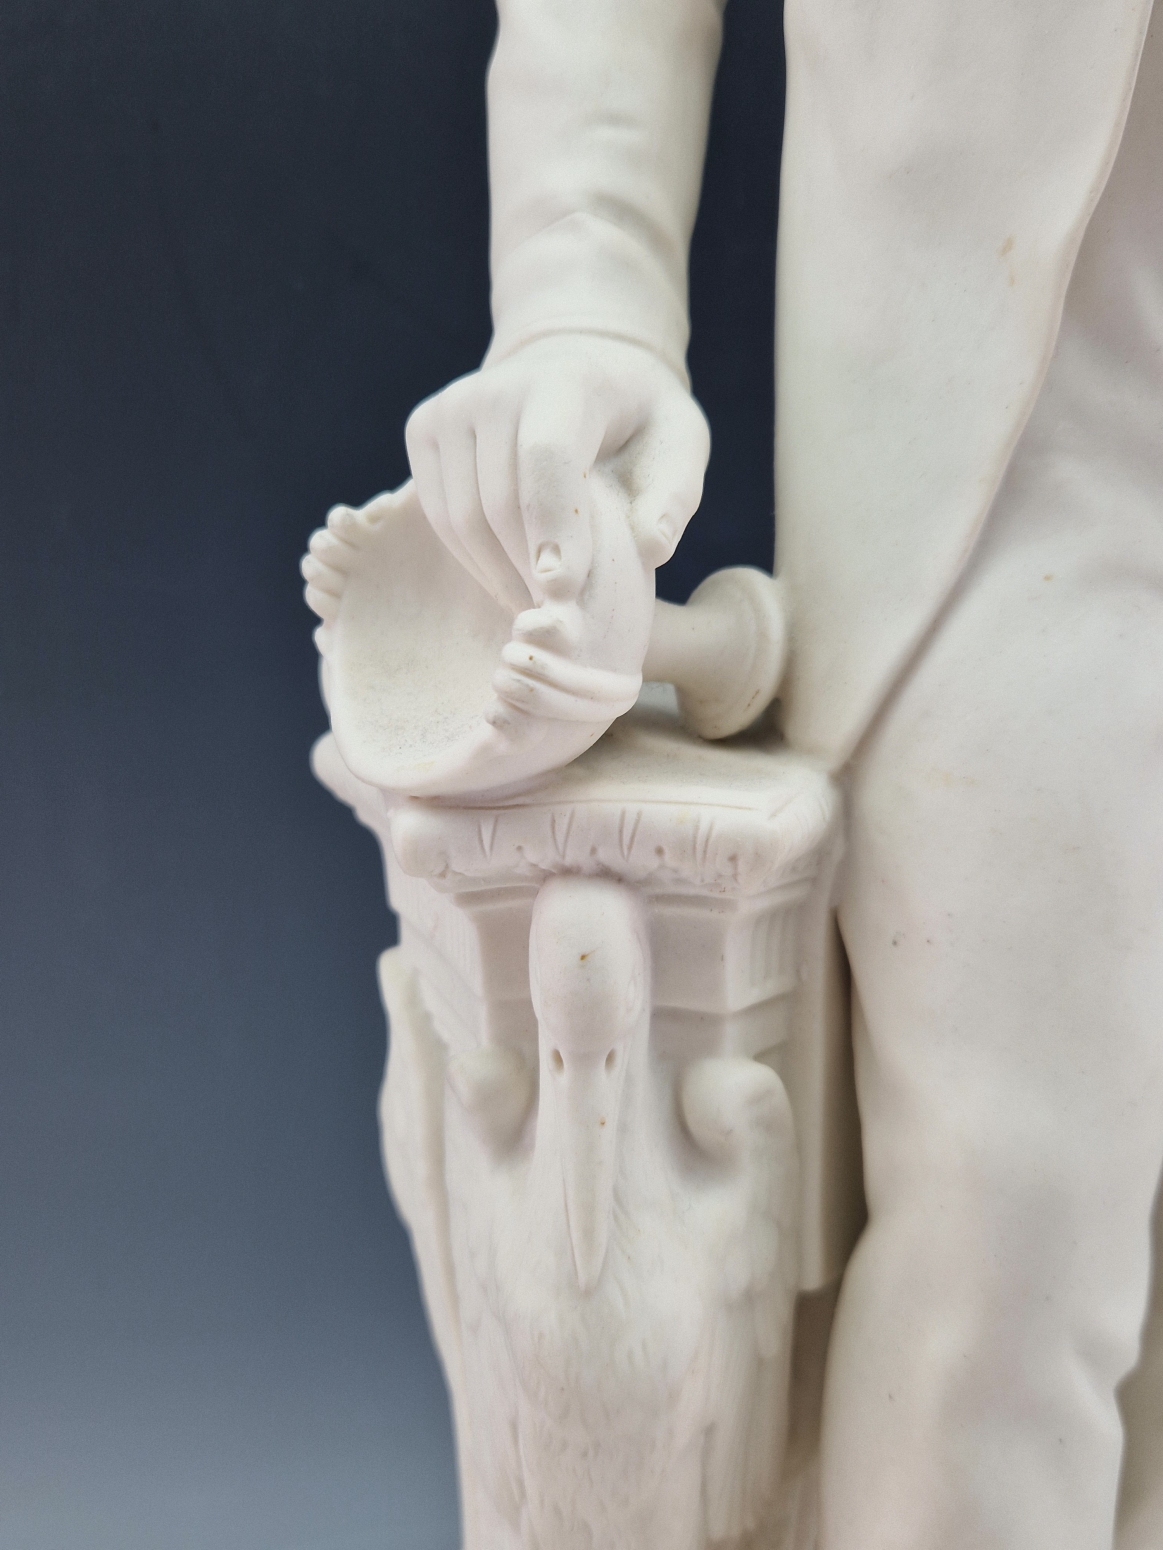 A 19th C. PARIAN FIGURE OF COLIN MINTON CAMPBELL STANDING HOLDING A CUP ON A COLUMN MOULDED THIS - Image 5 of 11